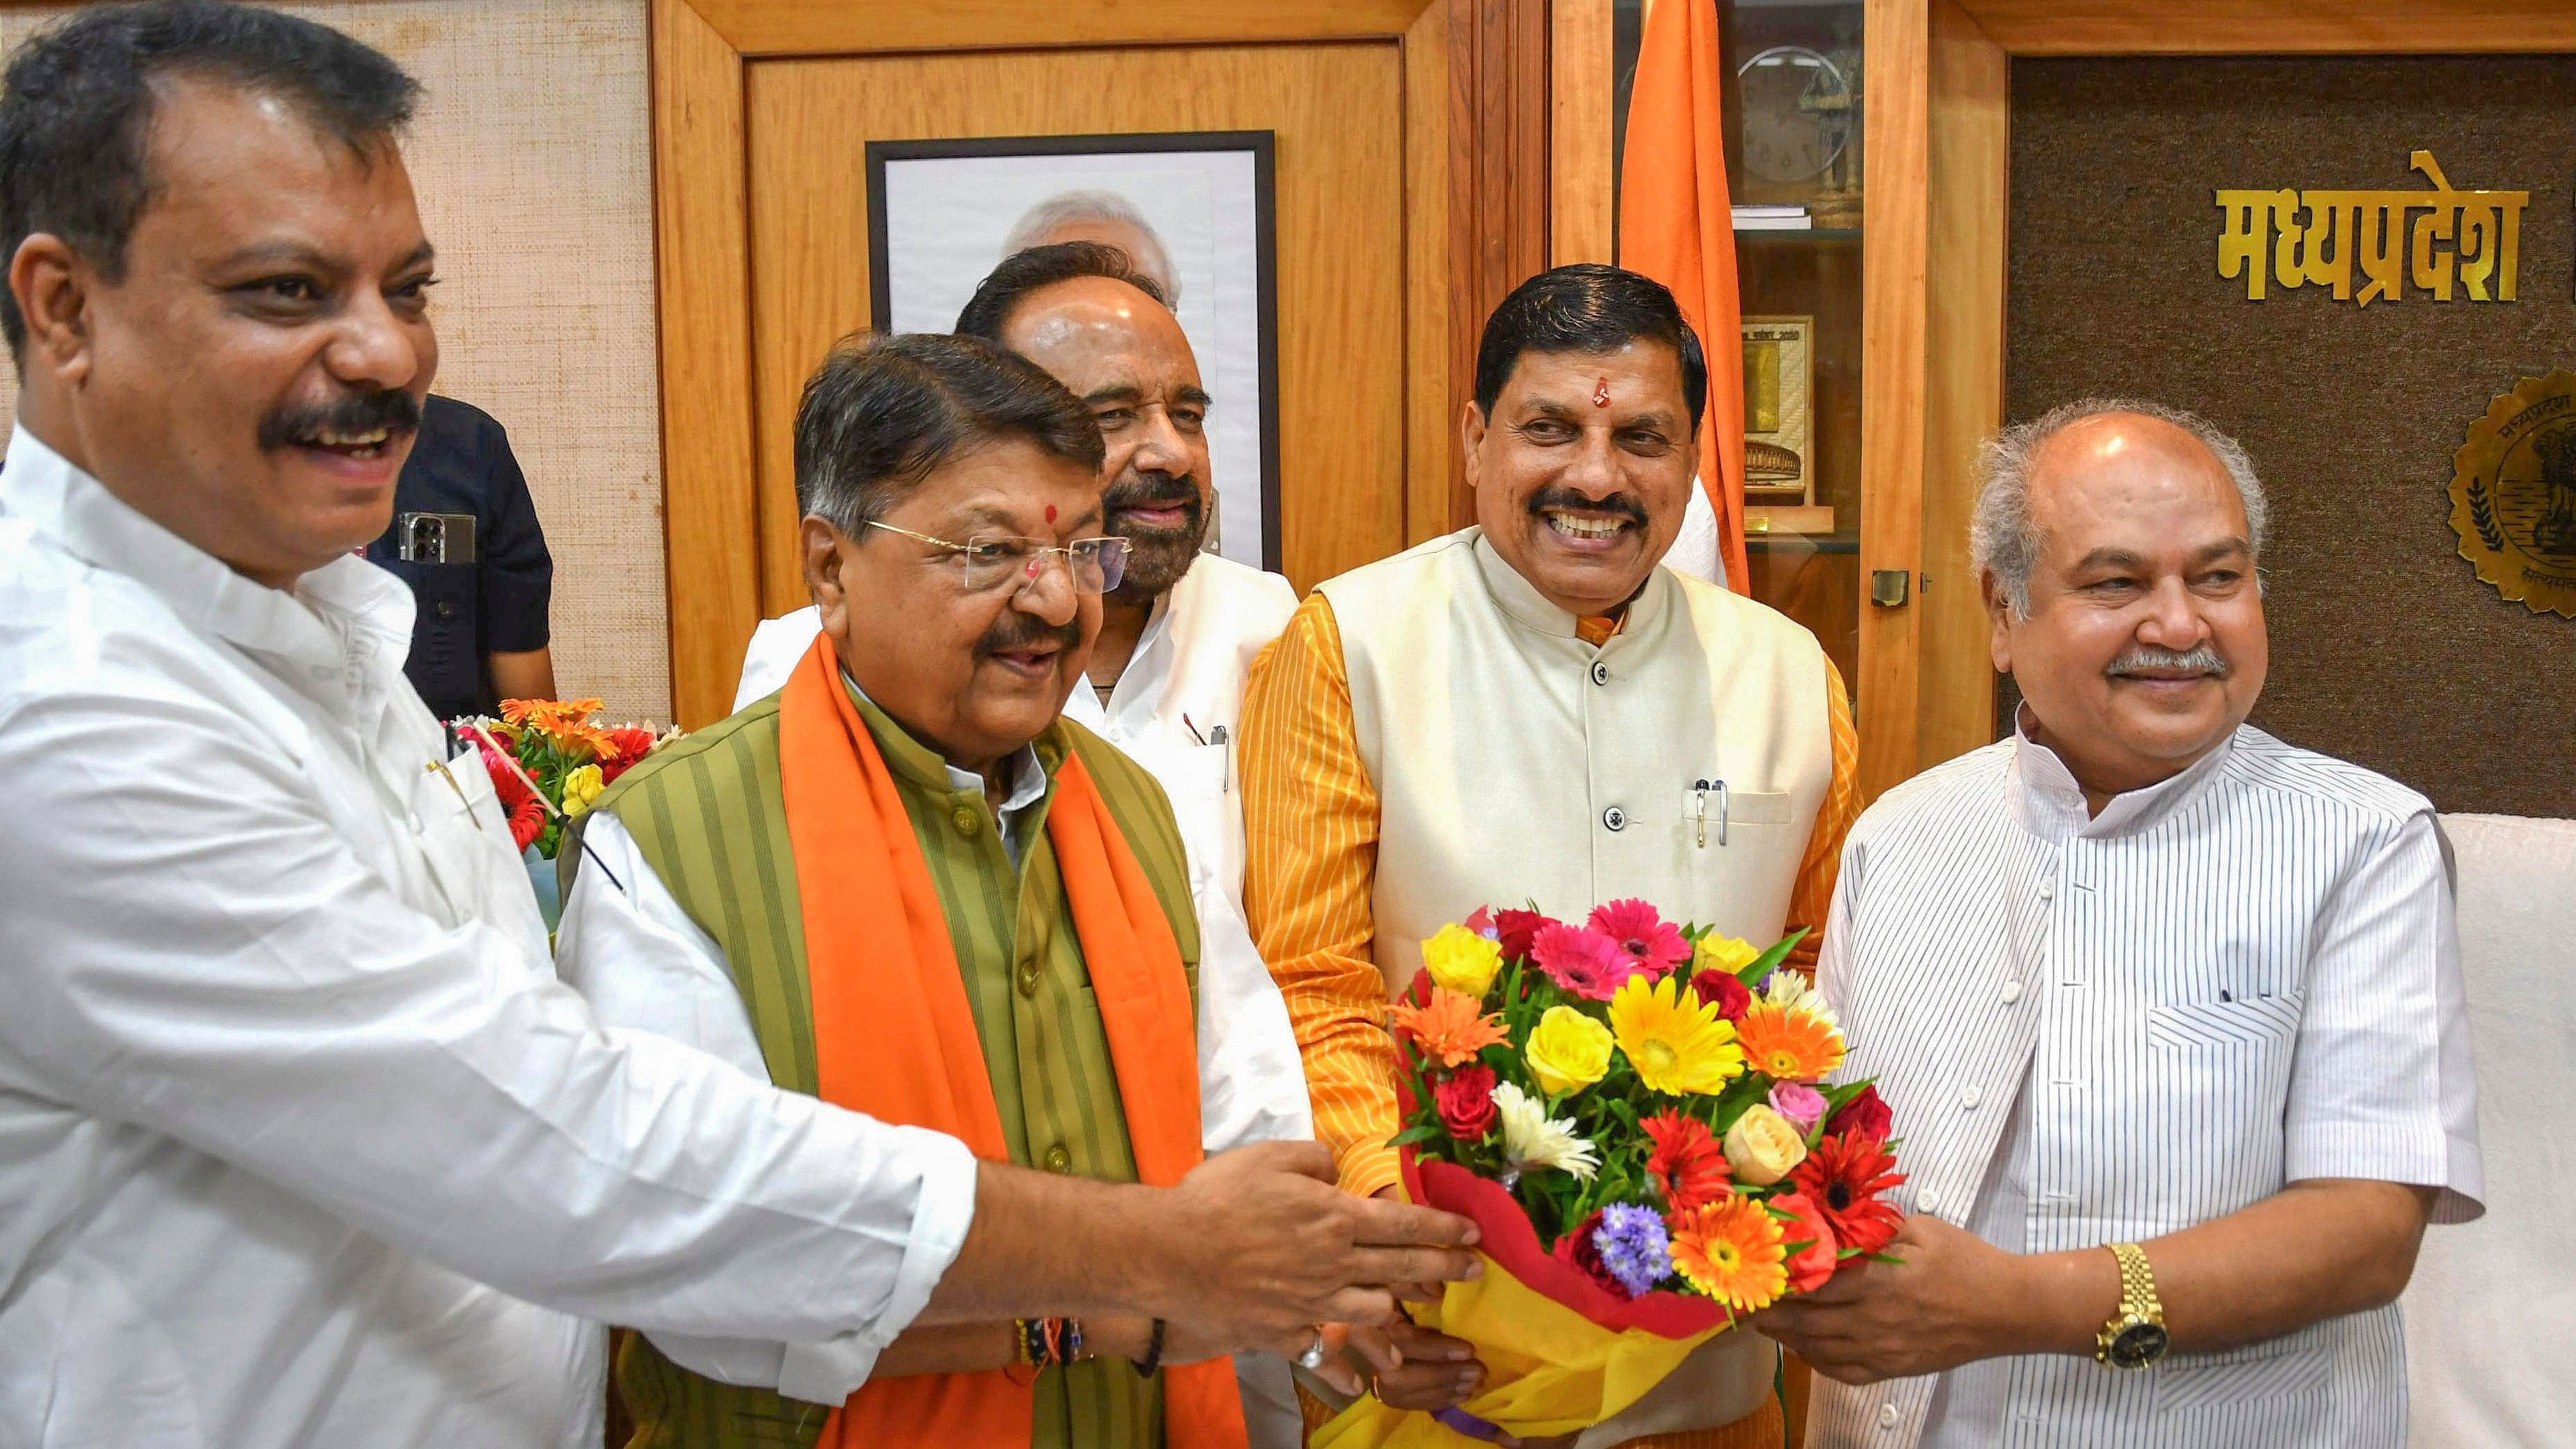 <div class="paragraphs"><p>Madhya Pradesh Chief Minister Mohan Yadav and Leader of Opposition Umang Singhar greet Legislative Assembly Speaker Narendra Singh Tomar on the first day of the monsoon session of the Madhya Pradesh State Assembly, in Bhopal, on Monday.</p></div>